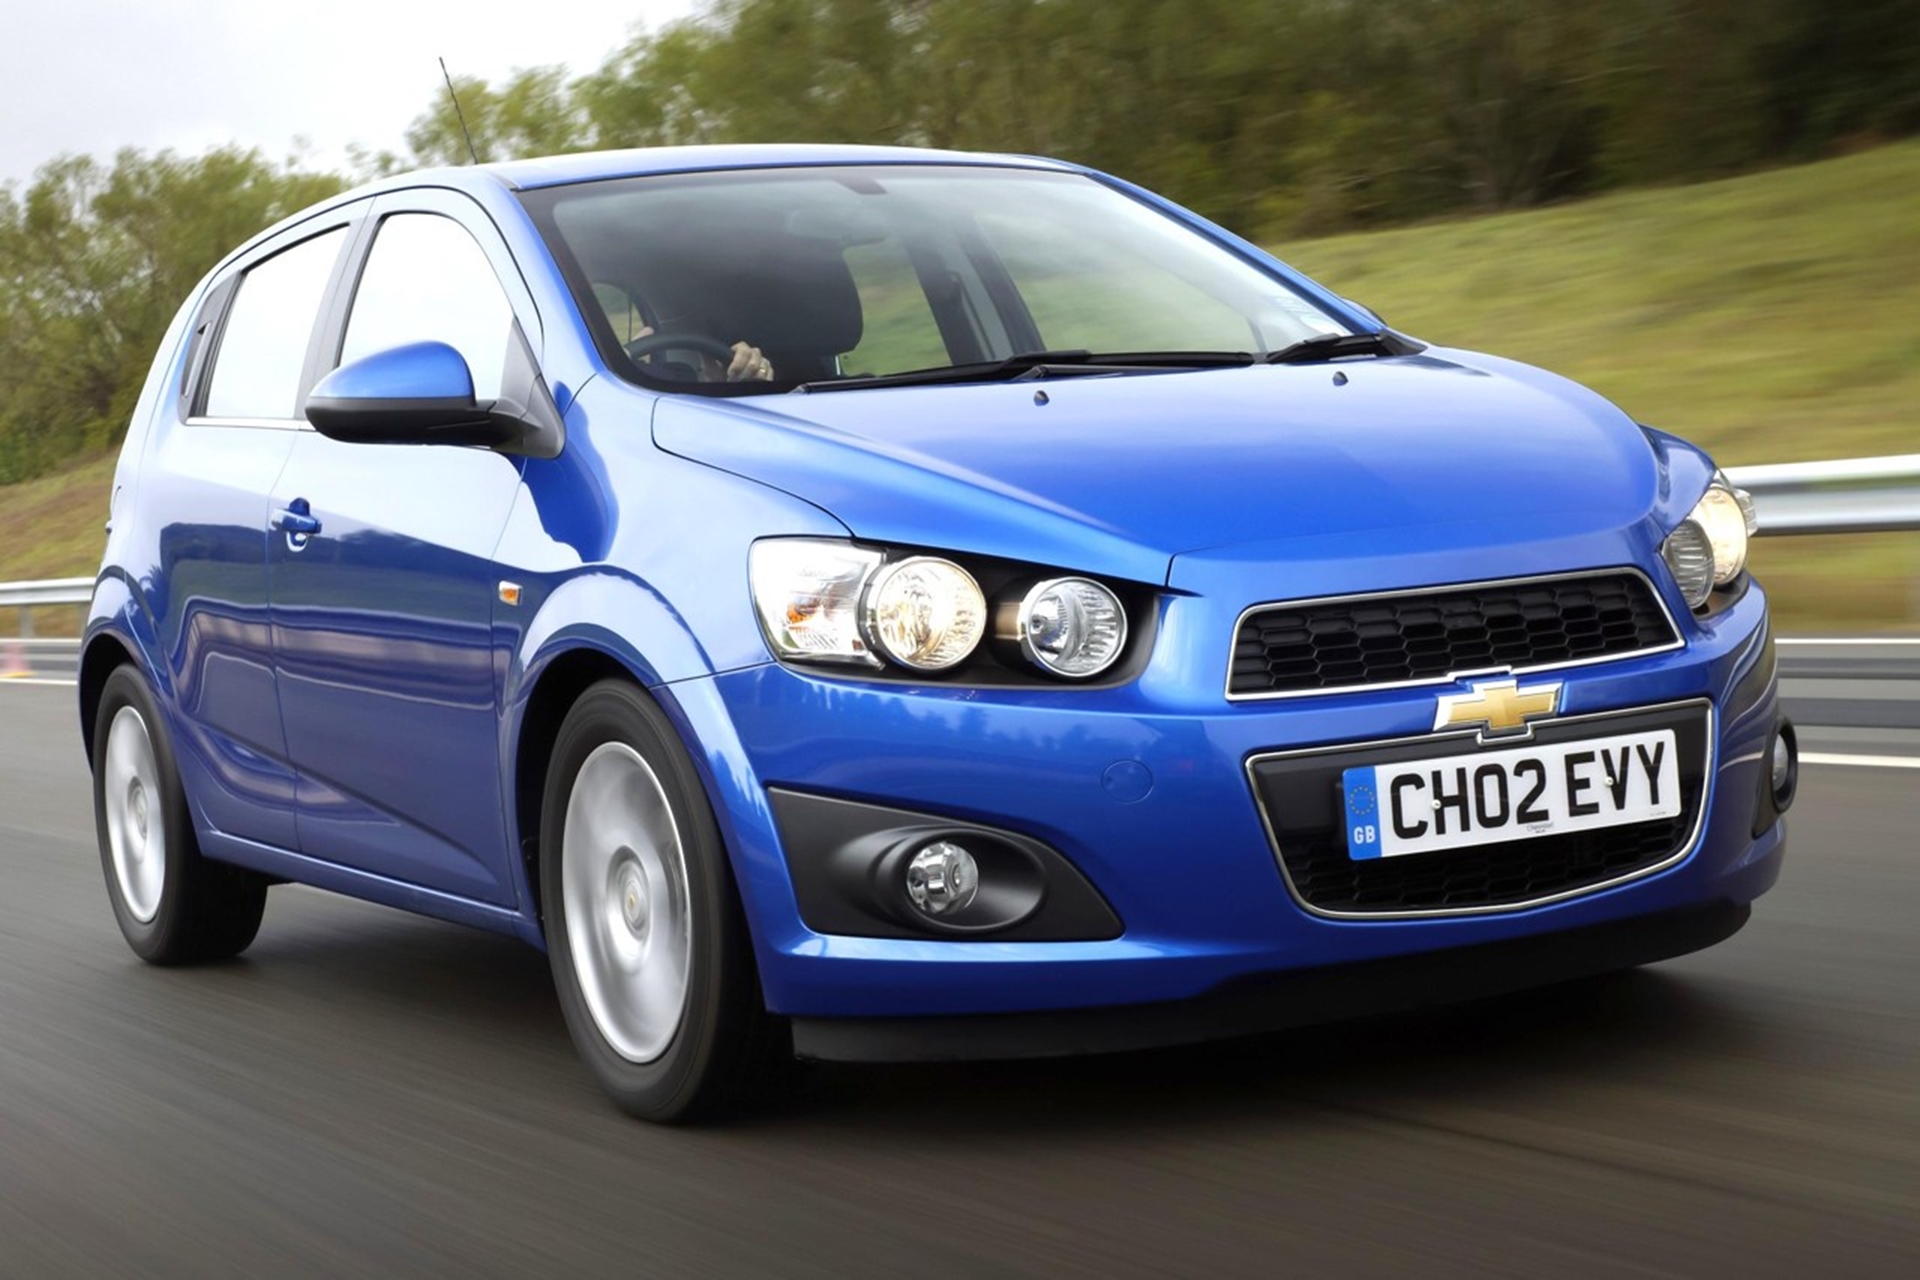 ENSURE YOUR FINANCES TAKE FIRST PLACE THIS SUMMER WITH CHEVROLET’S 0% APR FINANCE DEALS